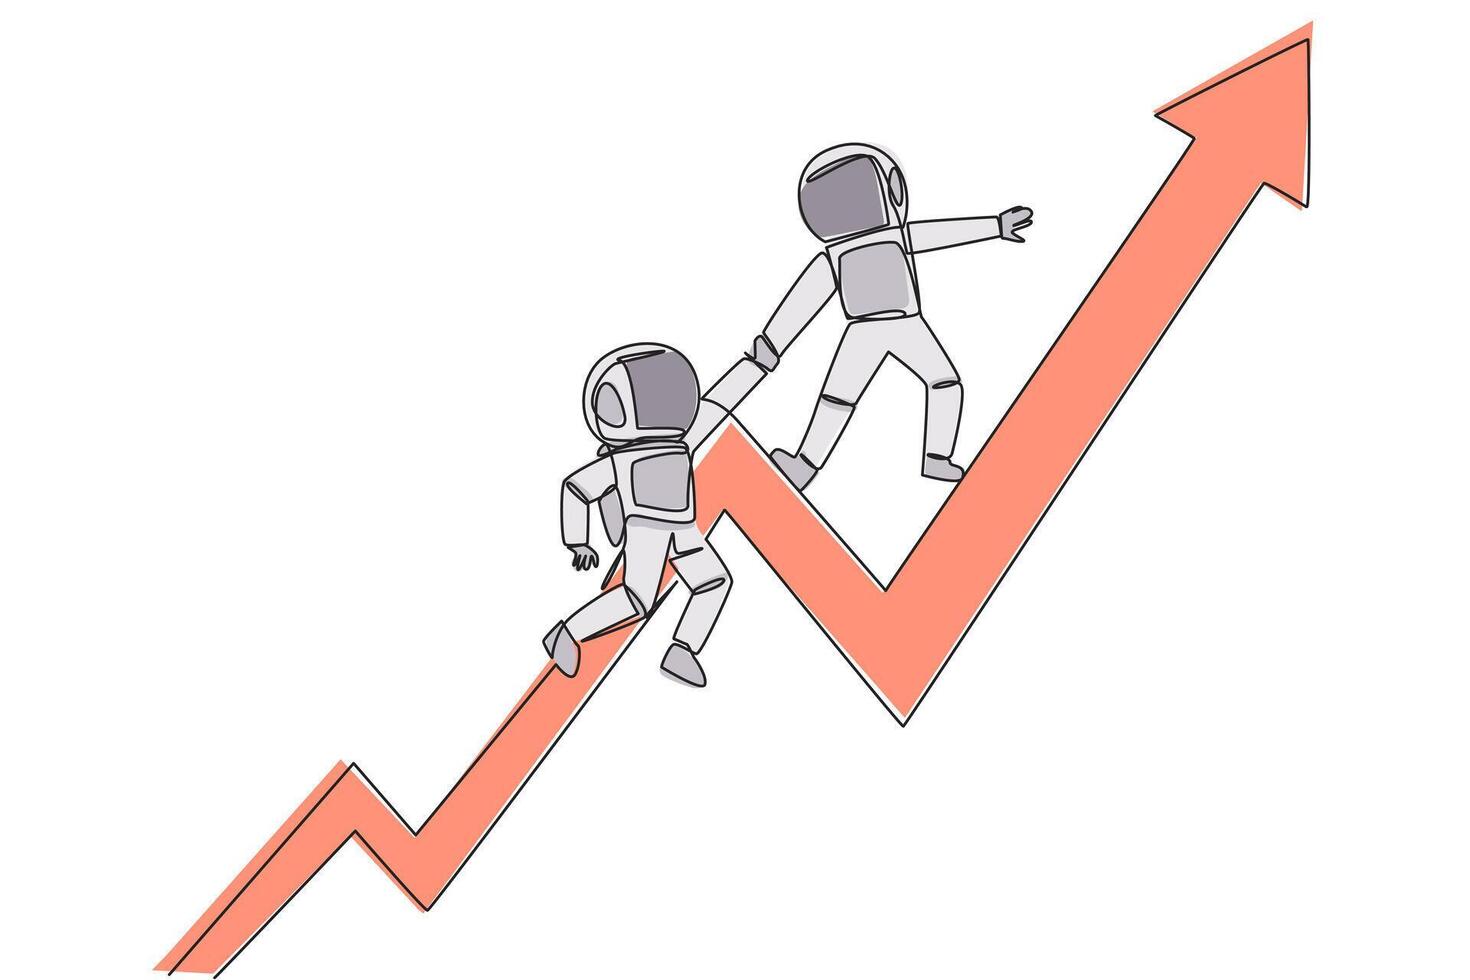 Single one line drawing young astronaut helps colleague to climbs big rising arrow symbol. Help each other to achieve satisfactory targets. Grow together. Continuous line design graphic illustration vector